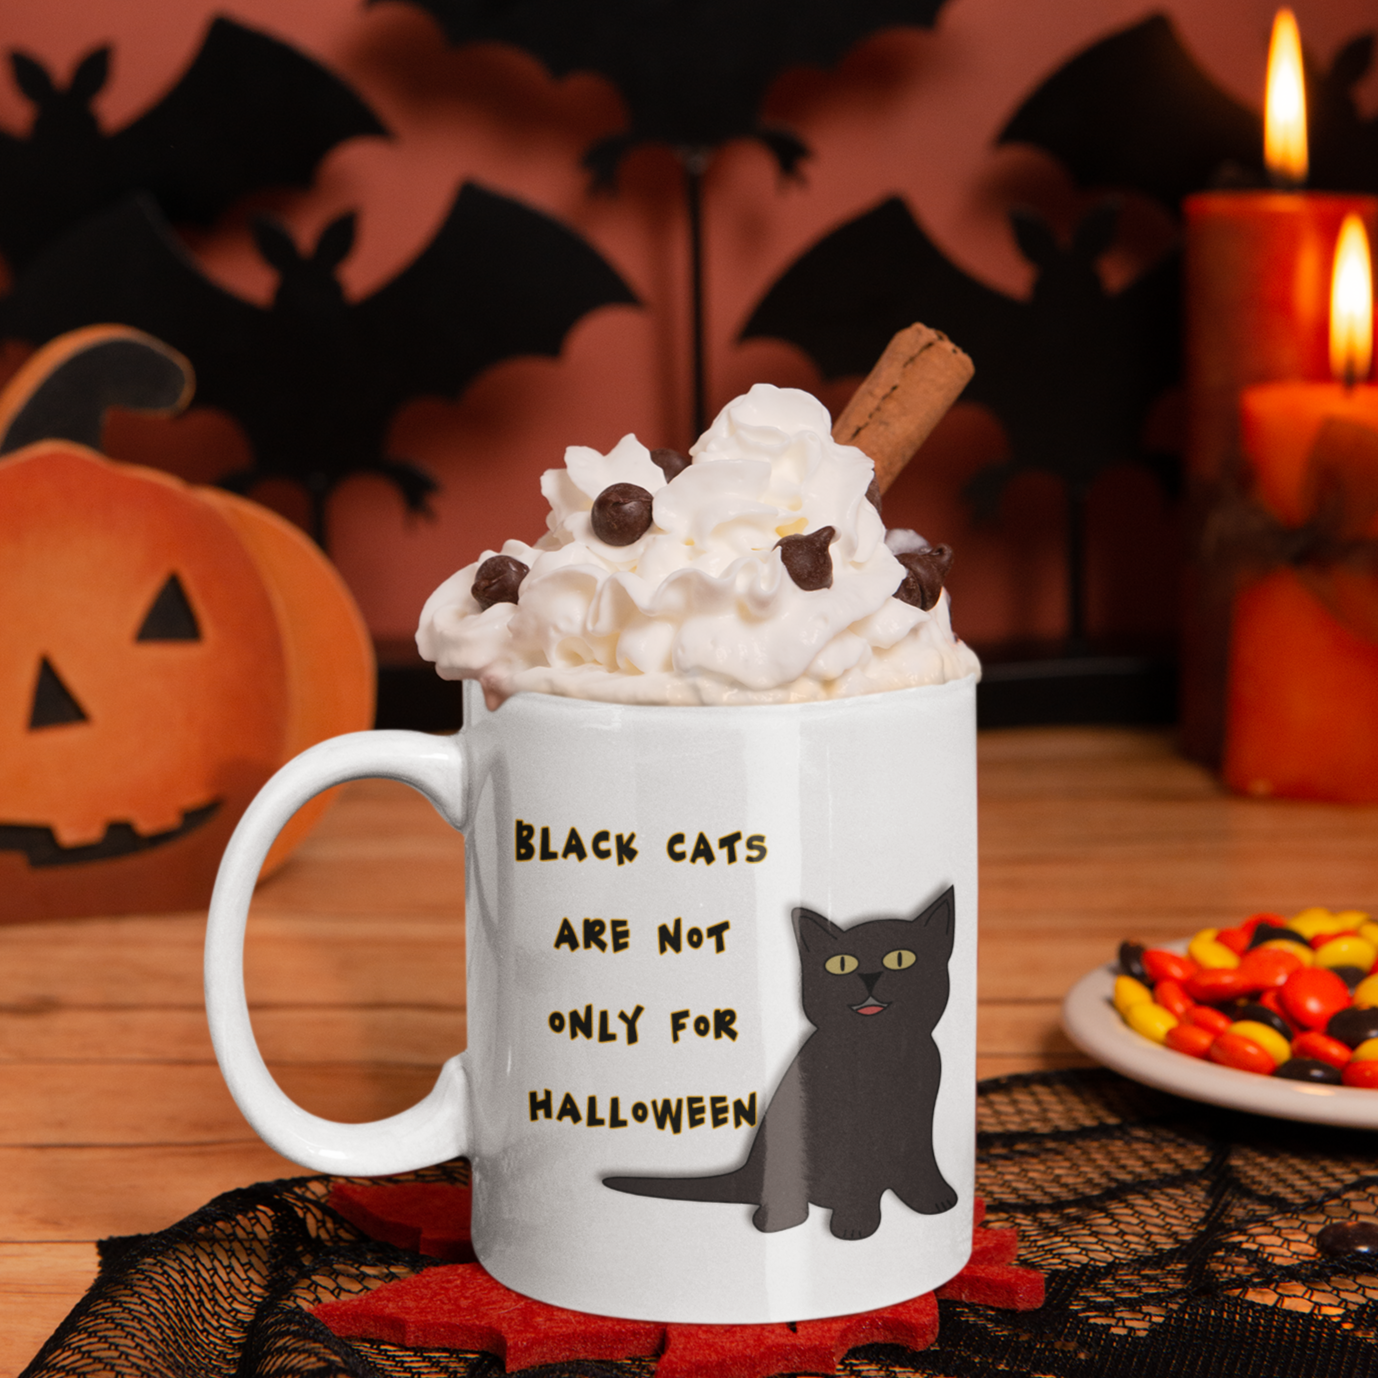 Black Cats Are Not Only For Halloween Mug